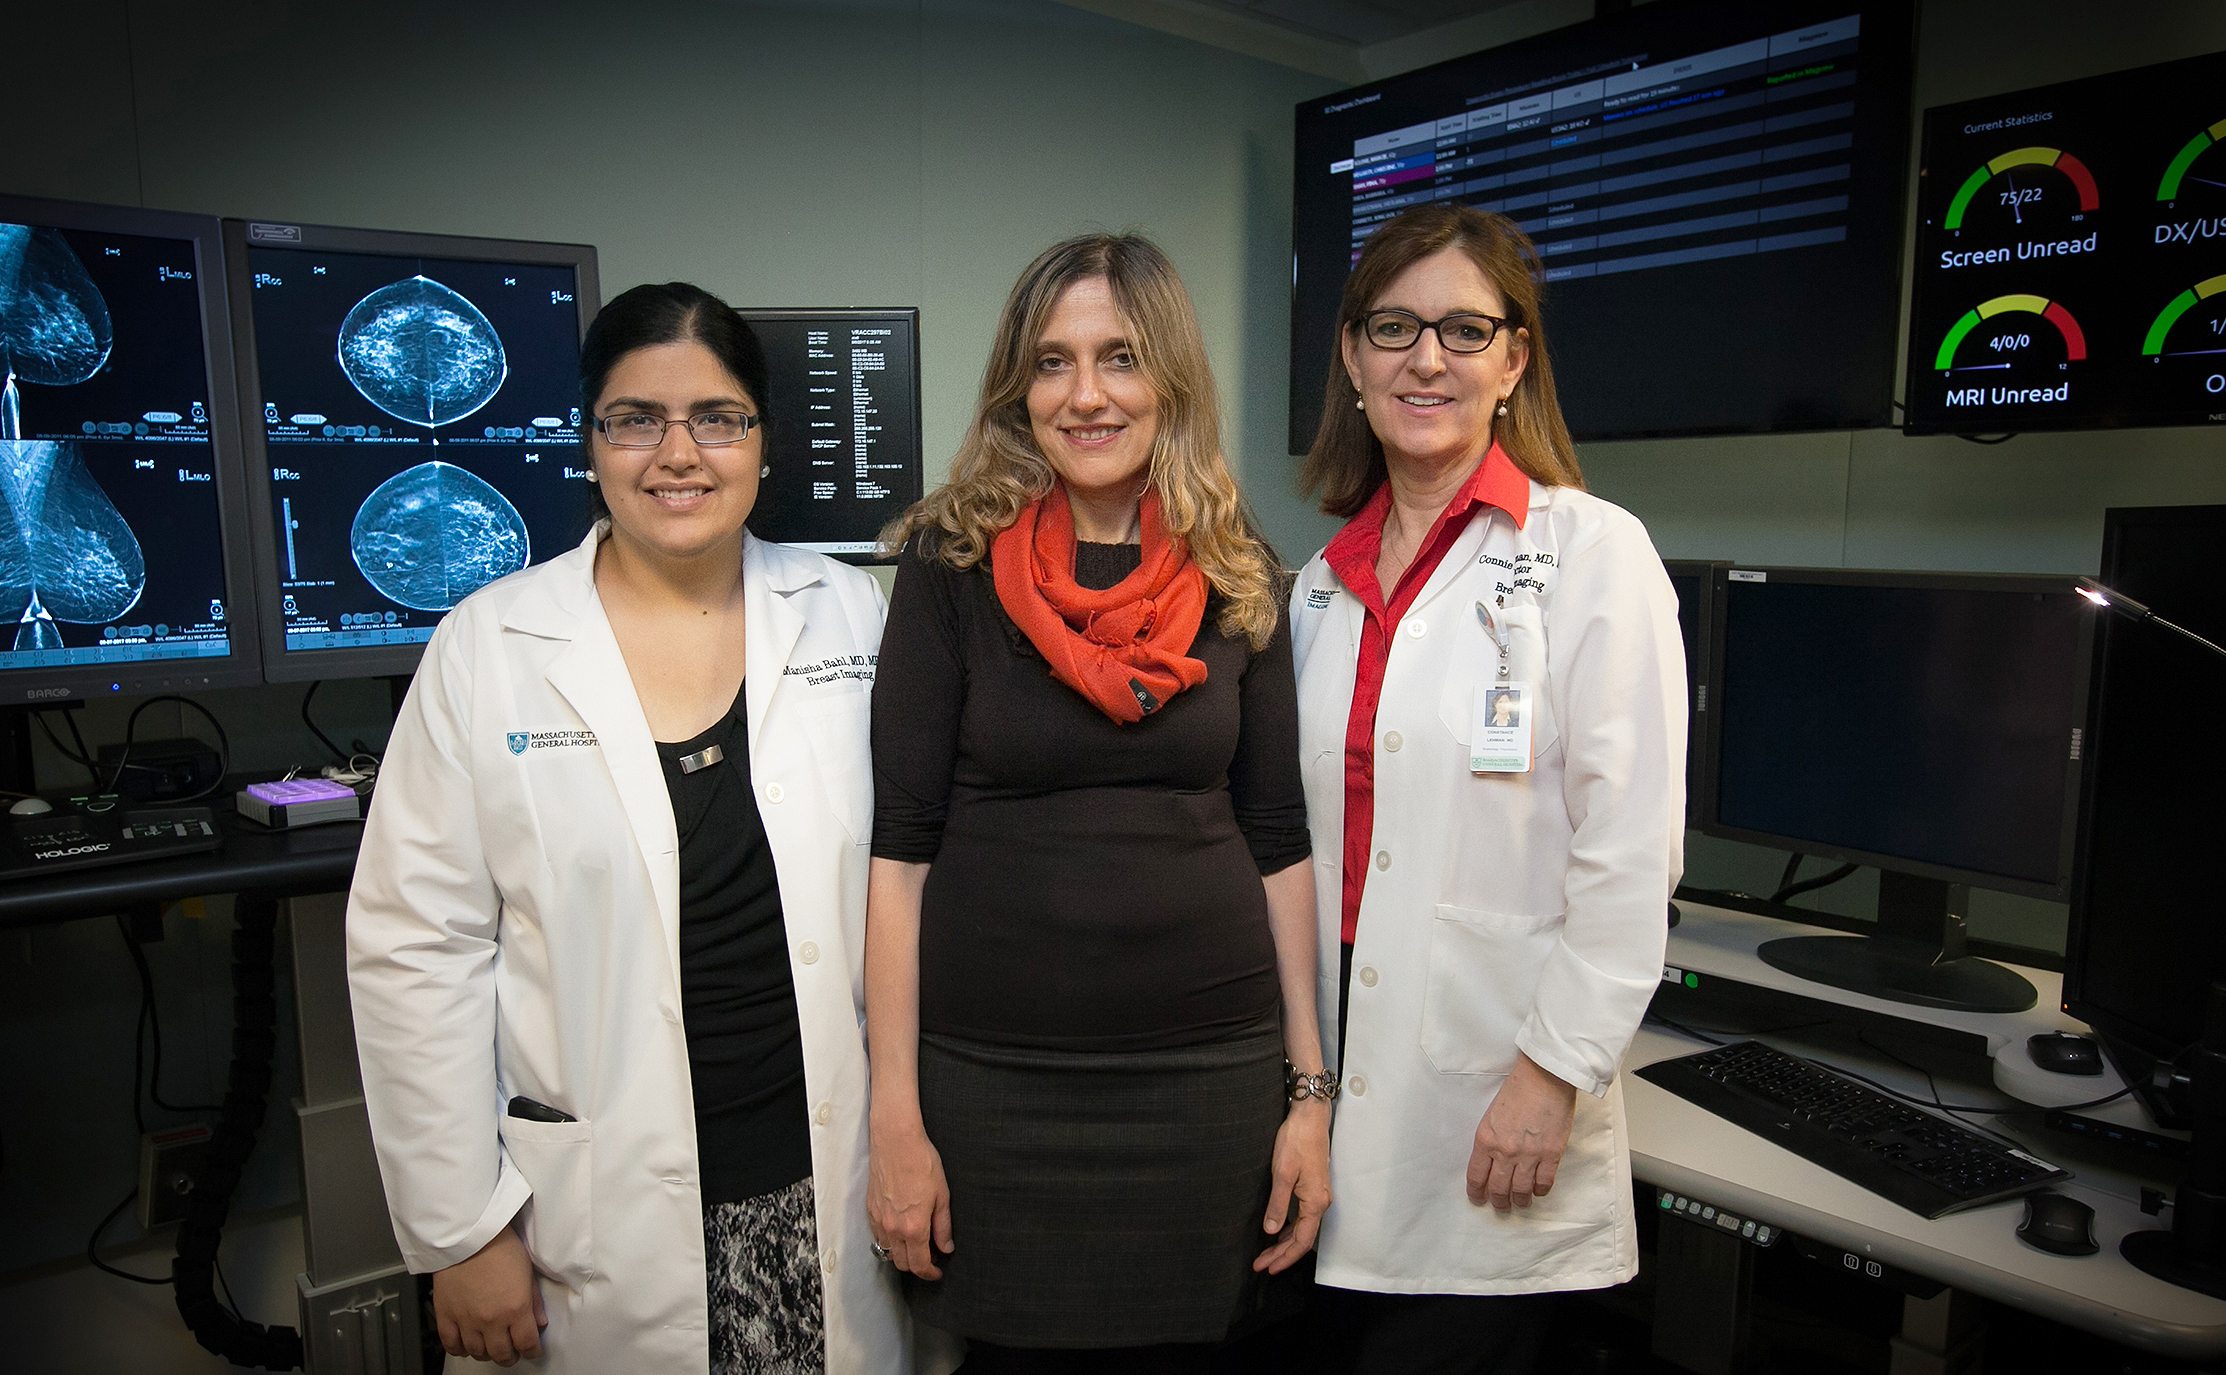 Machine Learning Aids Breast Cancer Screening